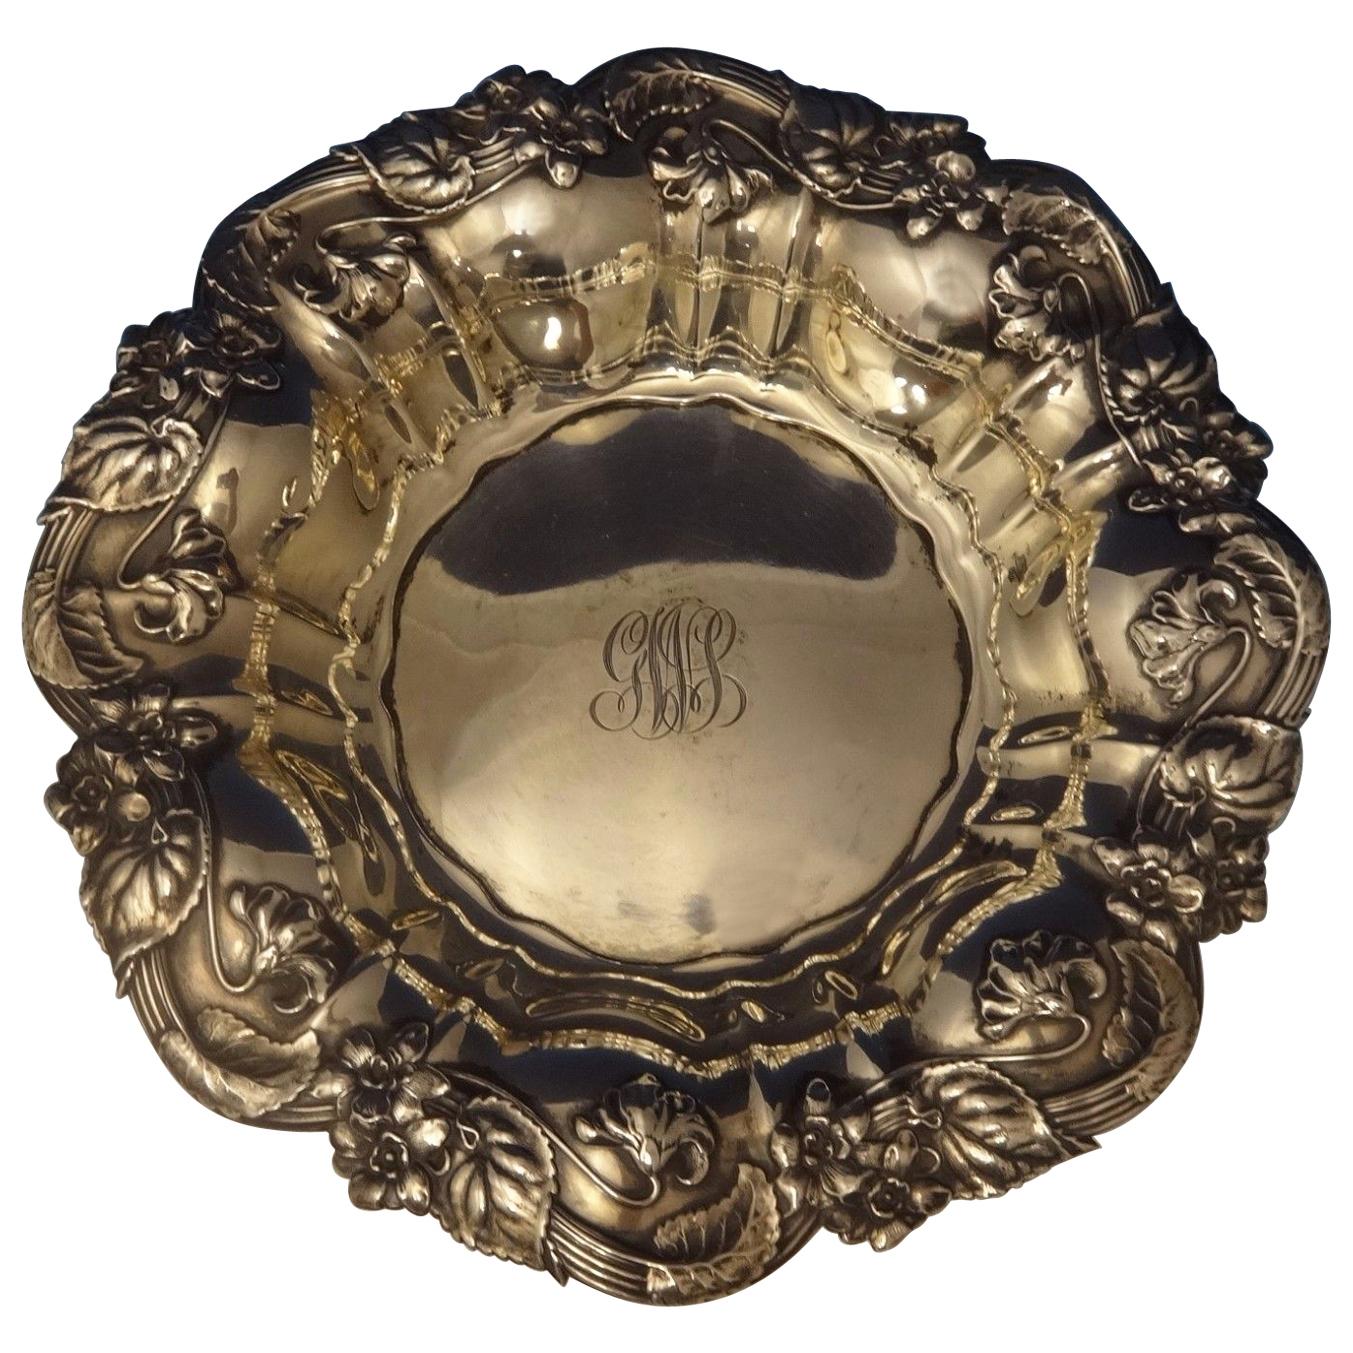 Violet by Whiting Sterling Silver Fruit Bowl, circa 1908